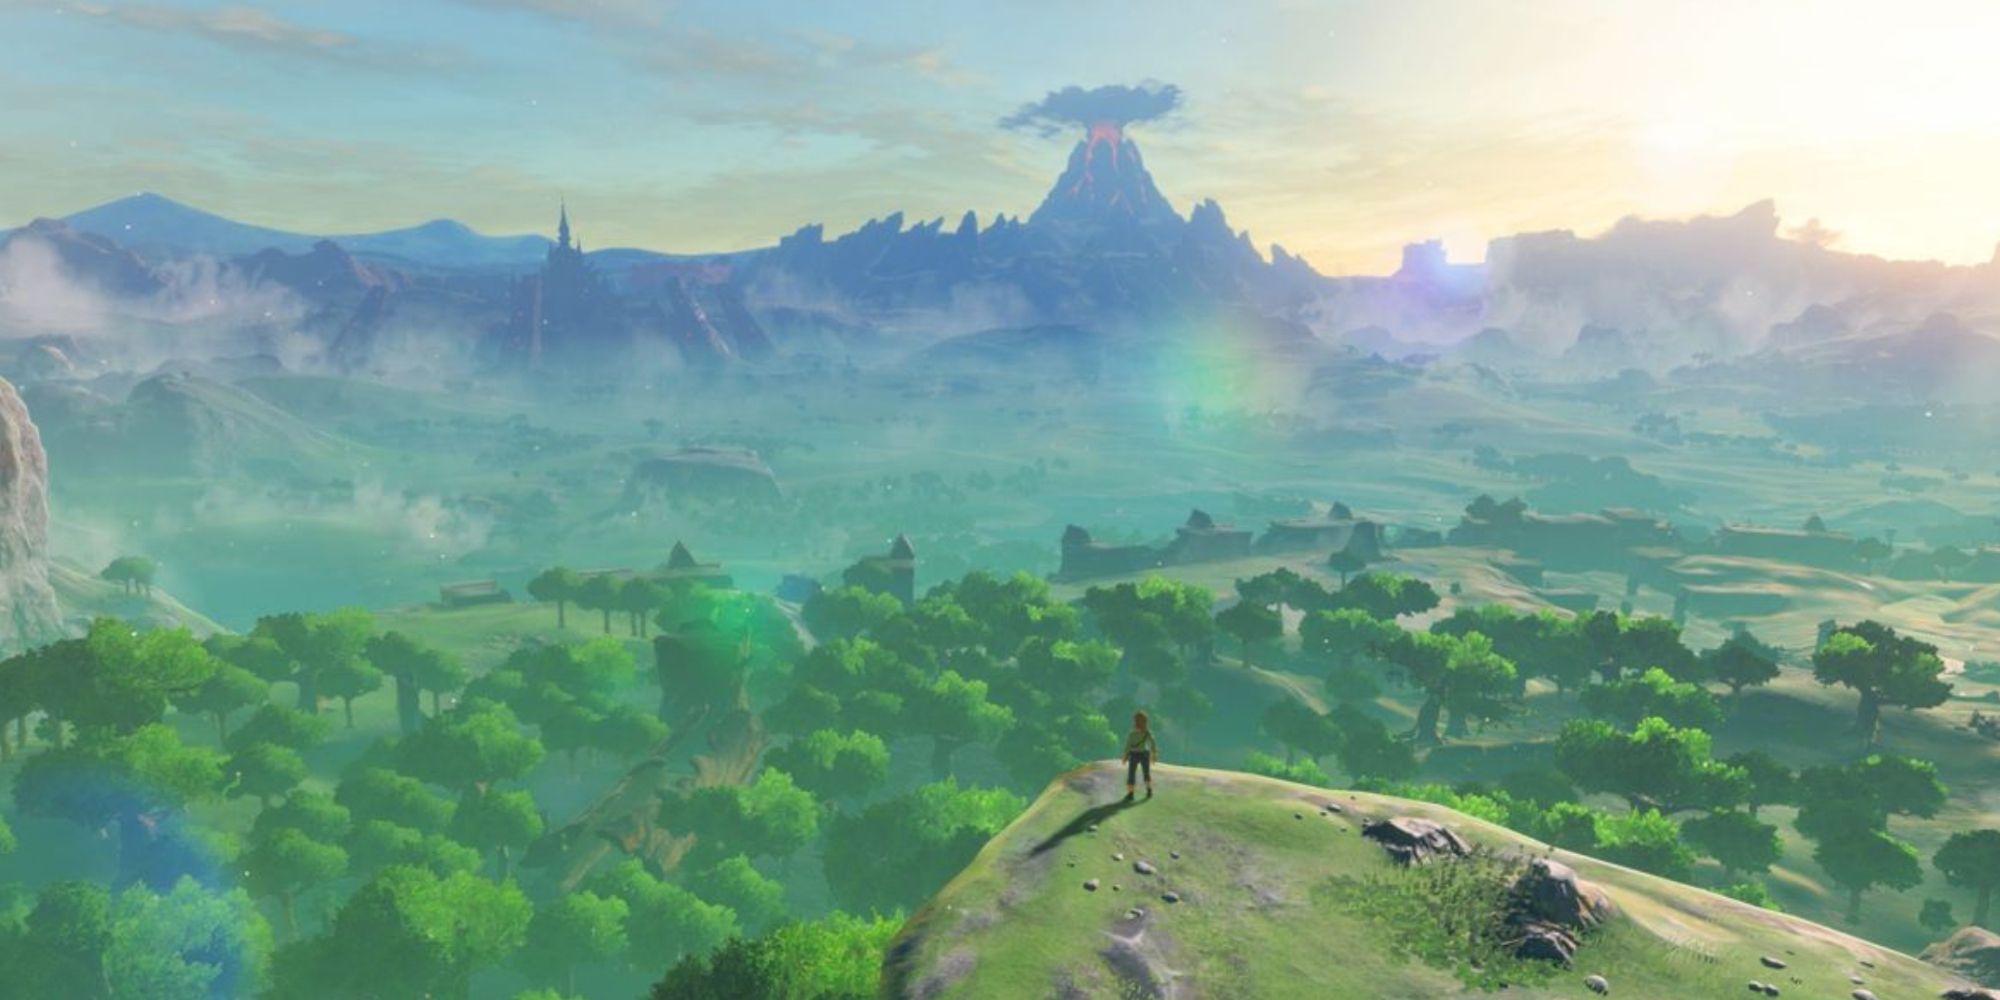 Link stares at Hyrule from the edge of the Great Plateau in The Legend of Zelda: Breath of the Wild